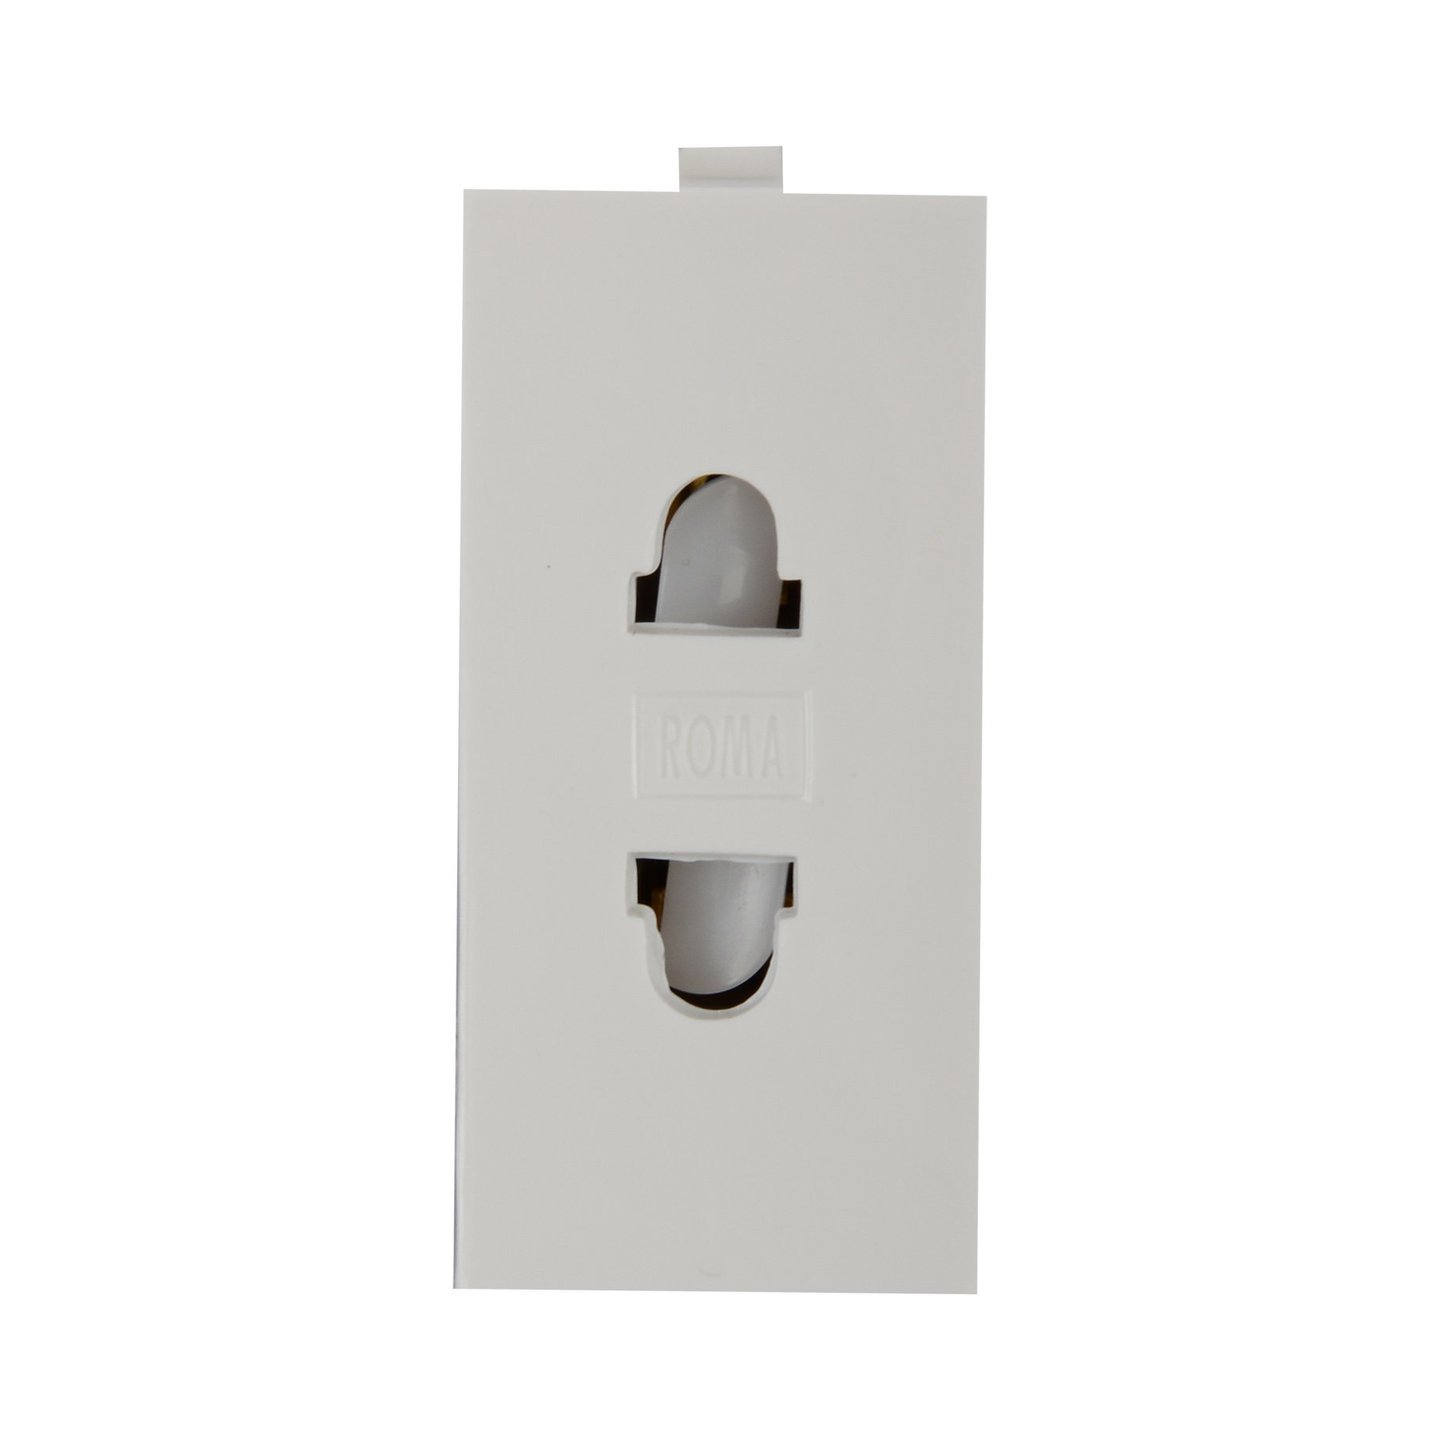 Anchor Roma Polycarbonate 2 Pin Socket Uro 21667, White, 6 A 240V PACK OF 5